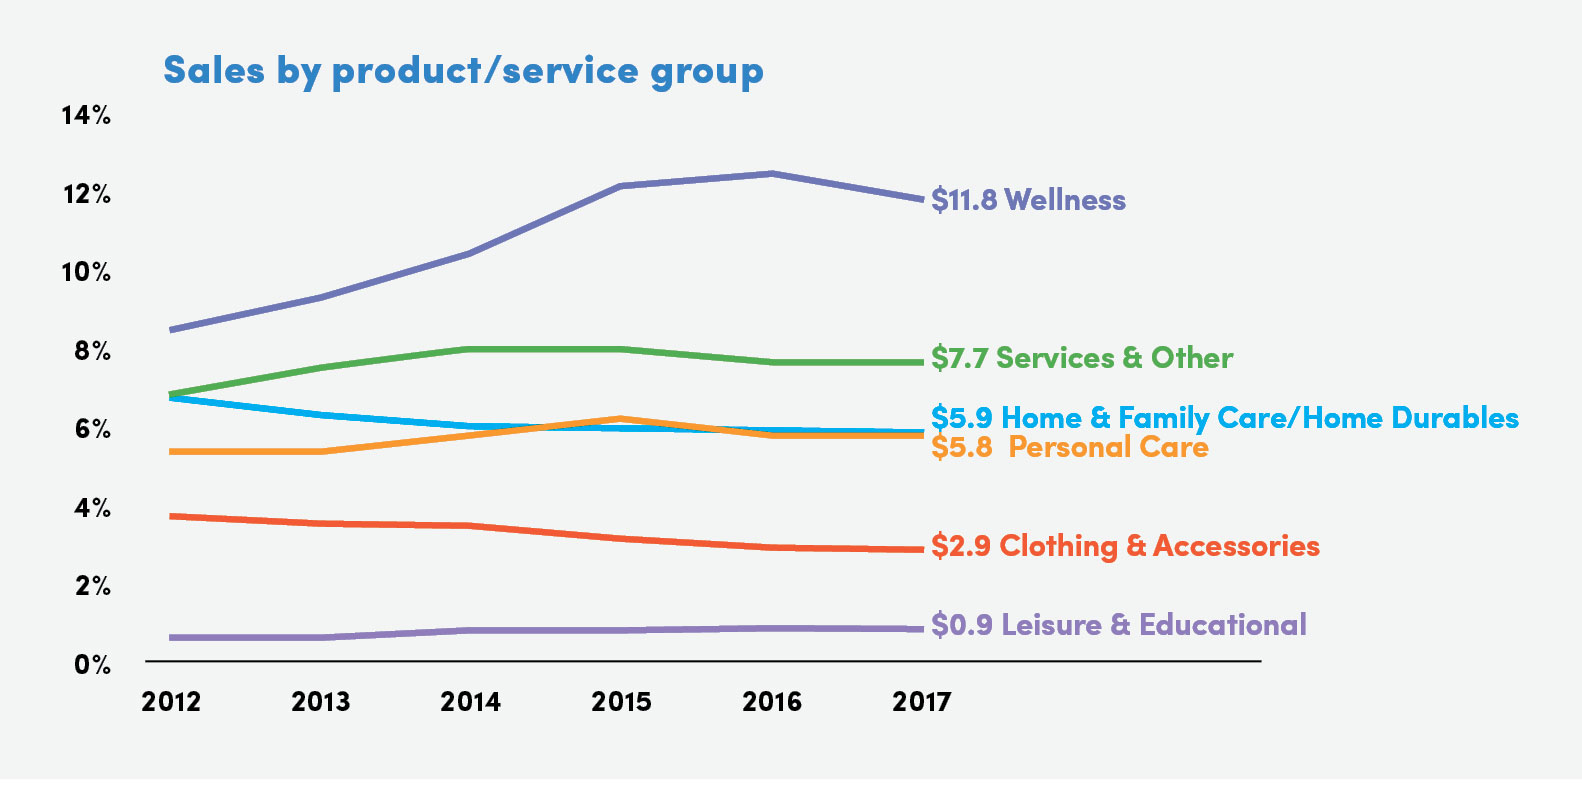 Sales by product/service group